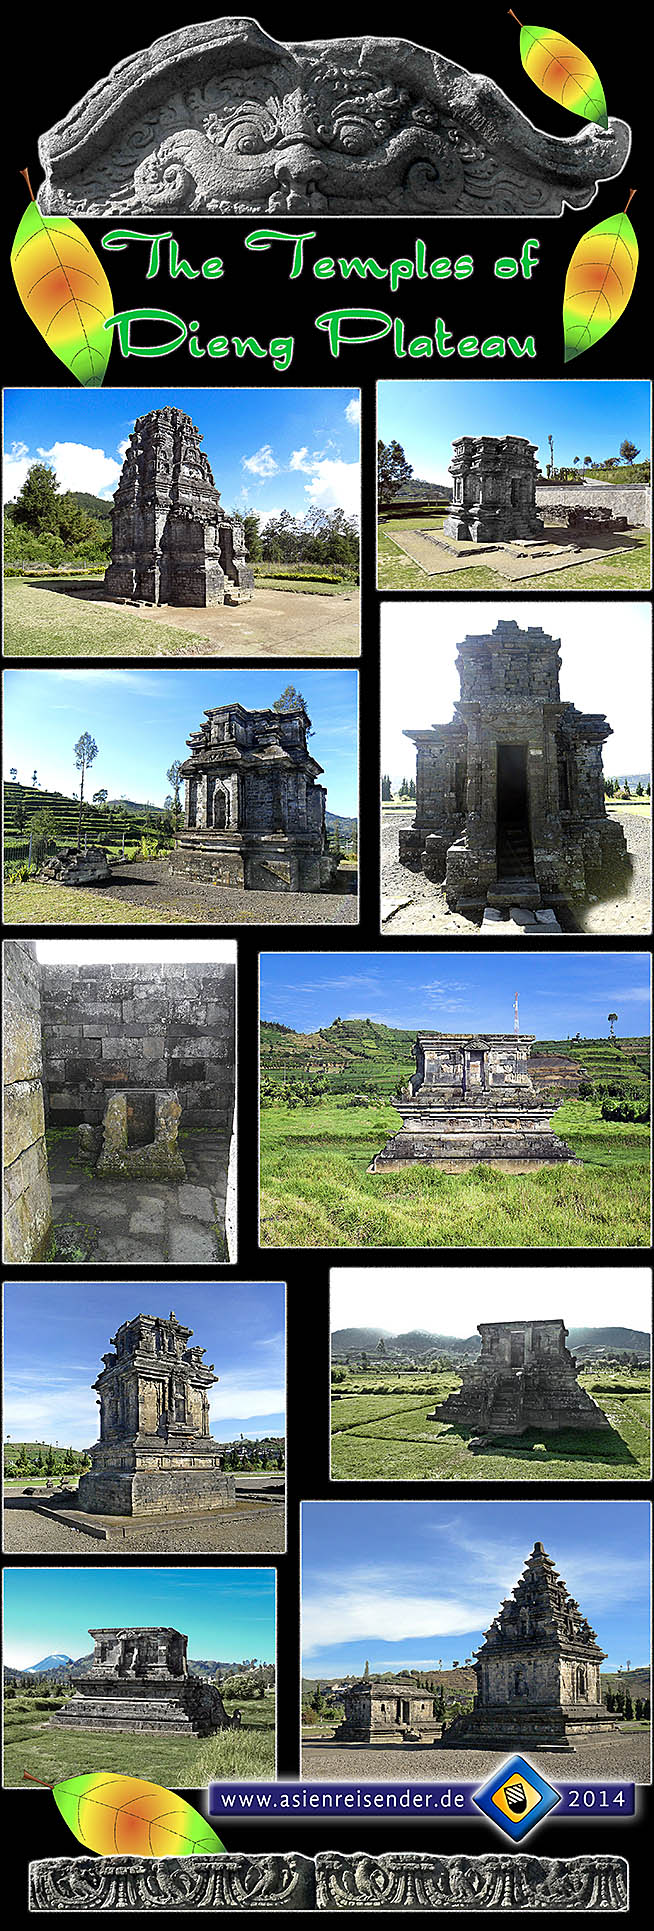 'The Monuments of Dieng Plateau' by Asienreisender